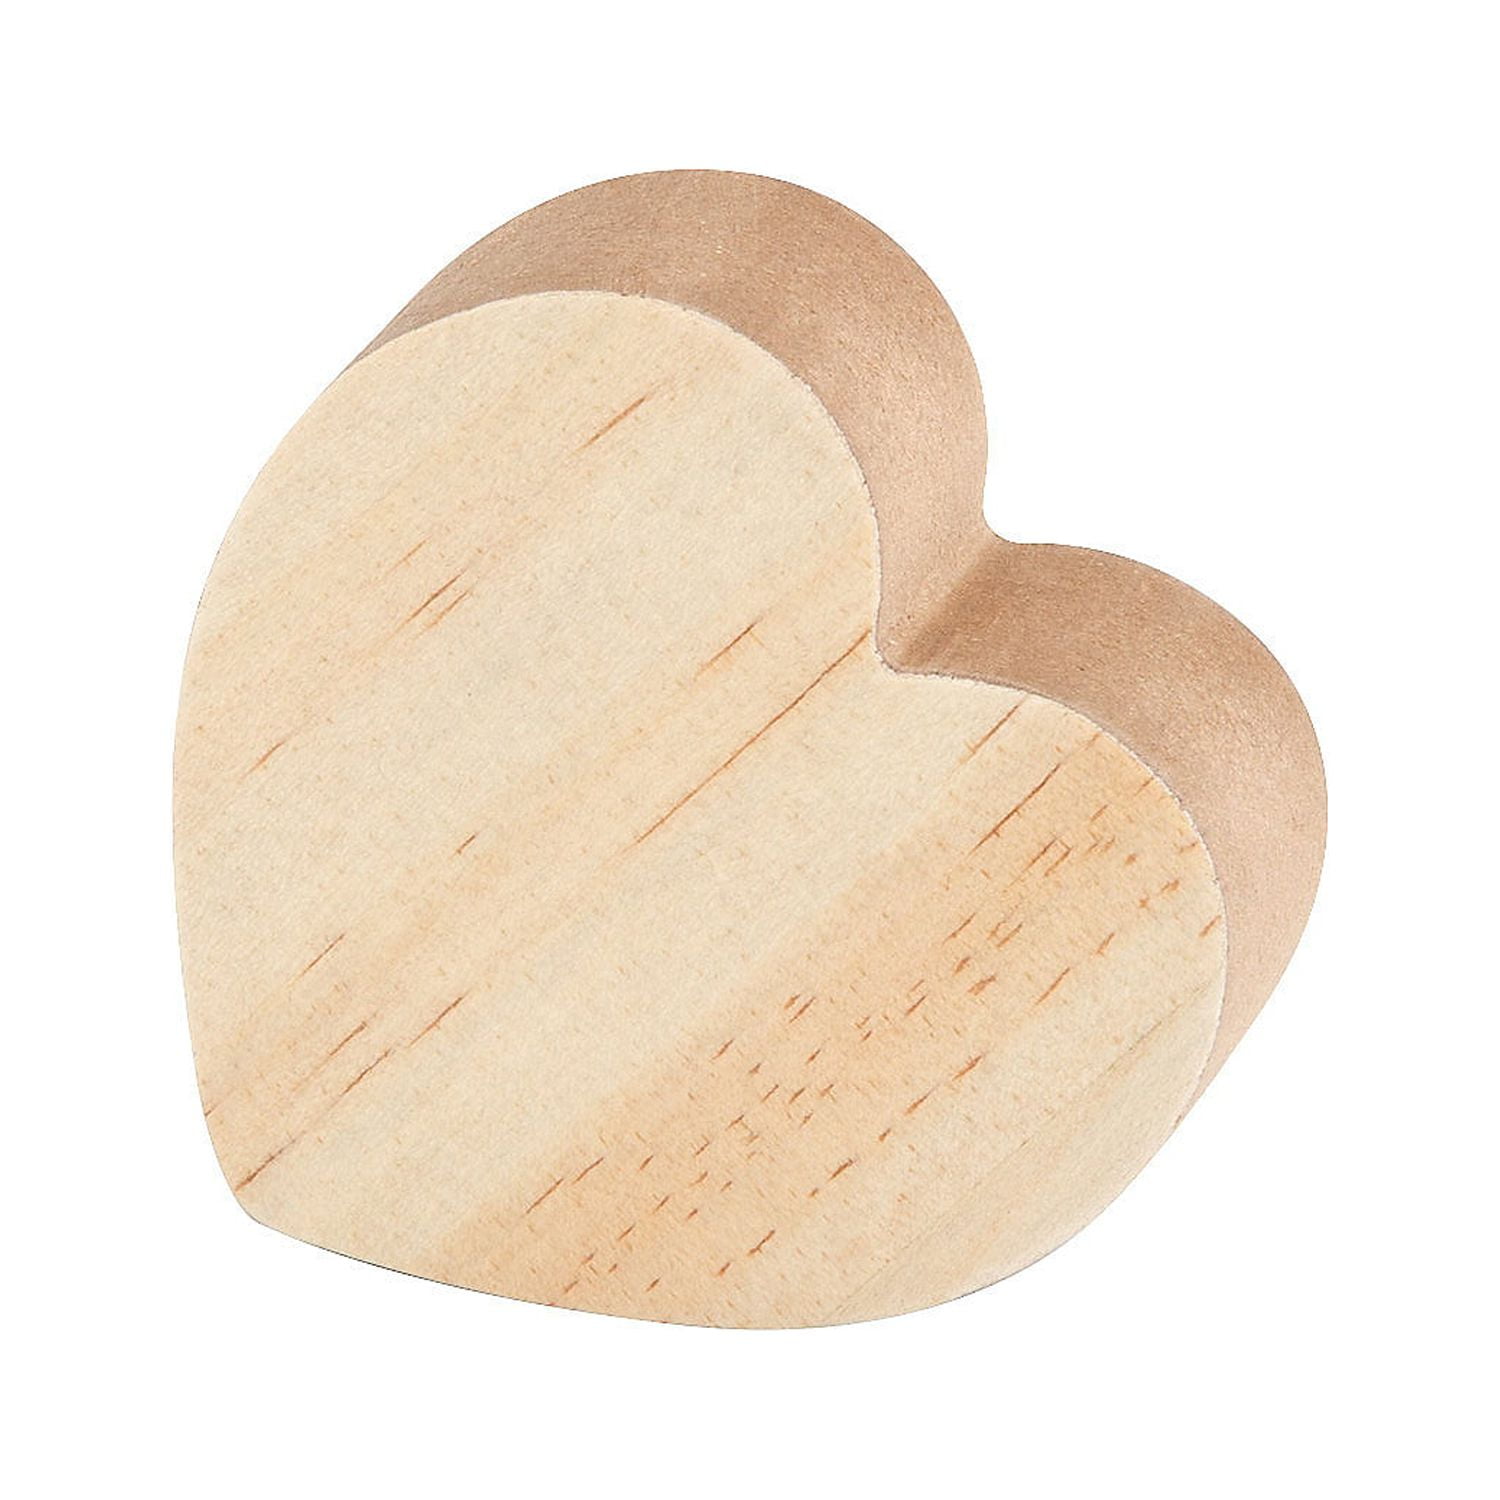 Unfinished Wood Heart, Wooden Heart Cutout, Wood Shapes for Crafts,  Valentine's Day Craft, Heart Crafts, DIY Tiered Tray, Gifts for Crafters 